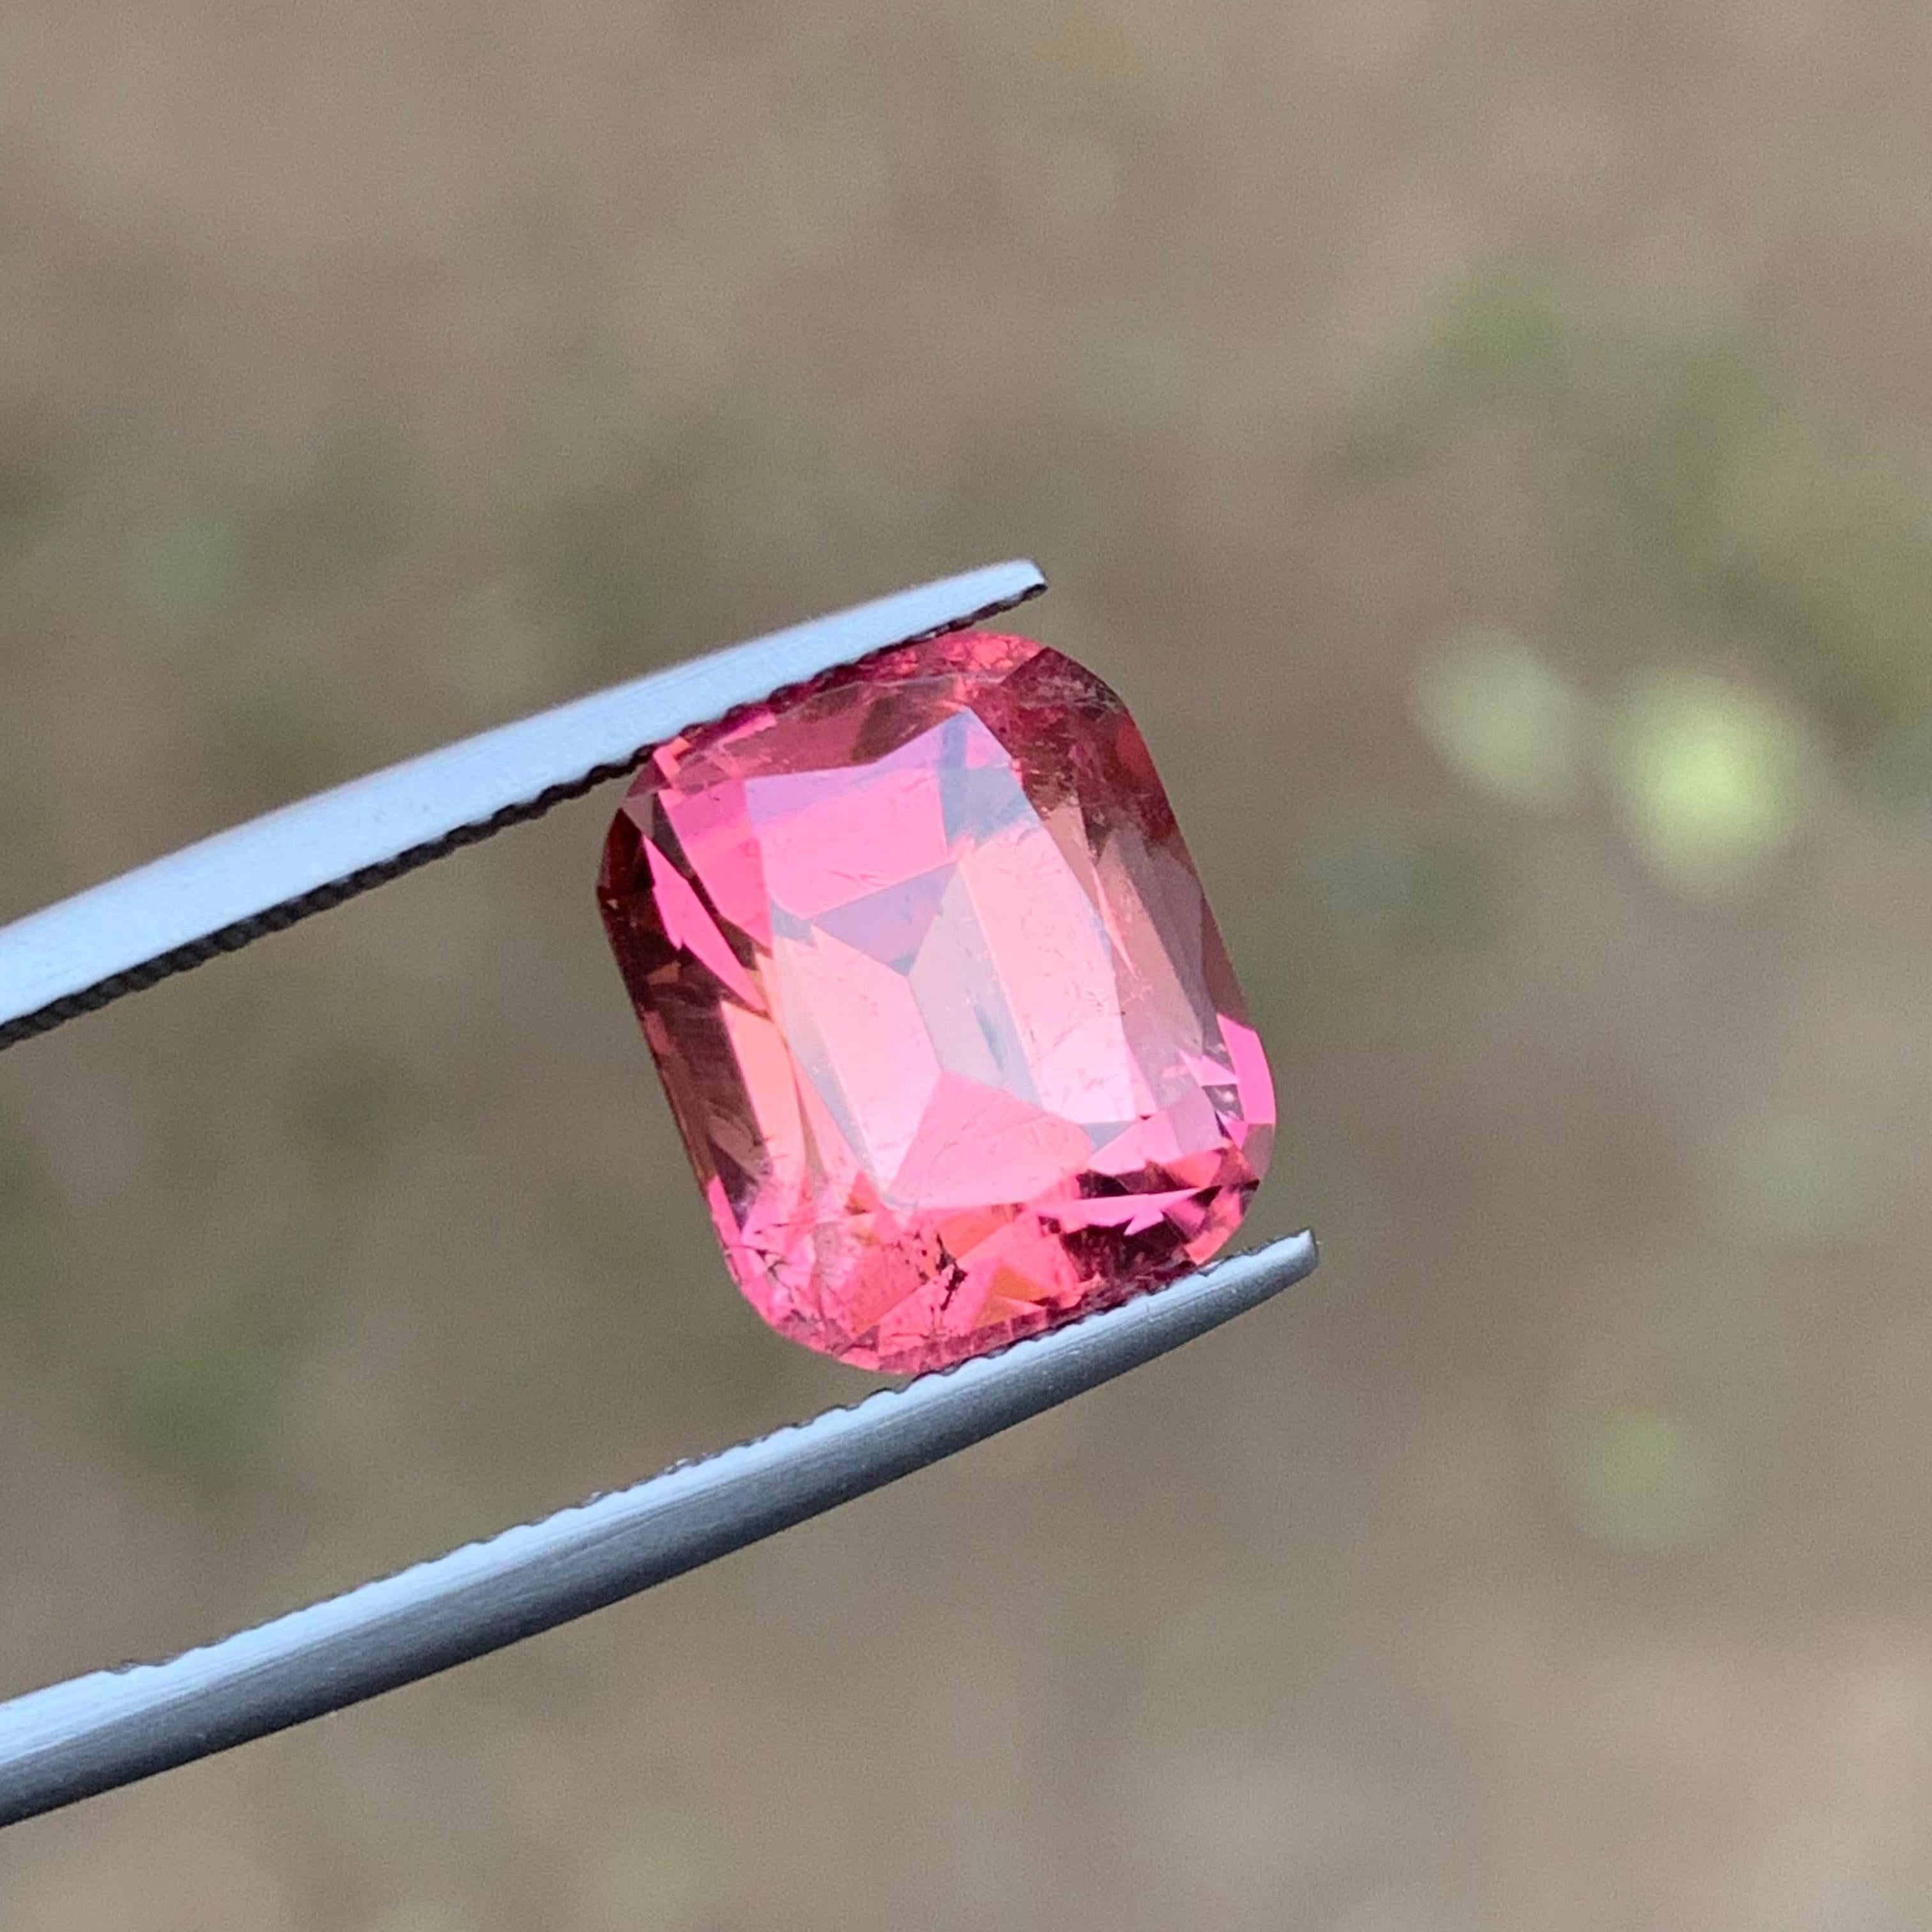 Rare Peachy Pink Natural Tourmaline Gemstone, 7.25 Ct Cushion for Ring/Pendant For Sale 2